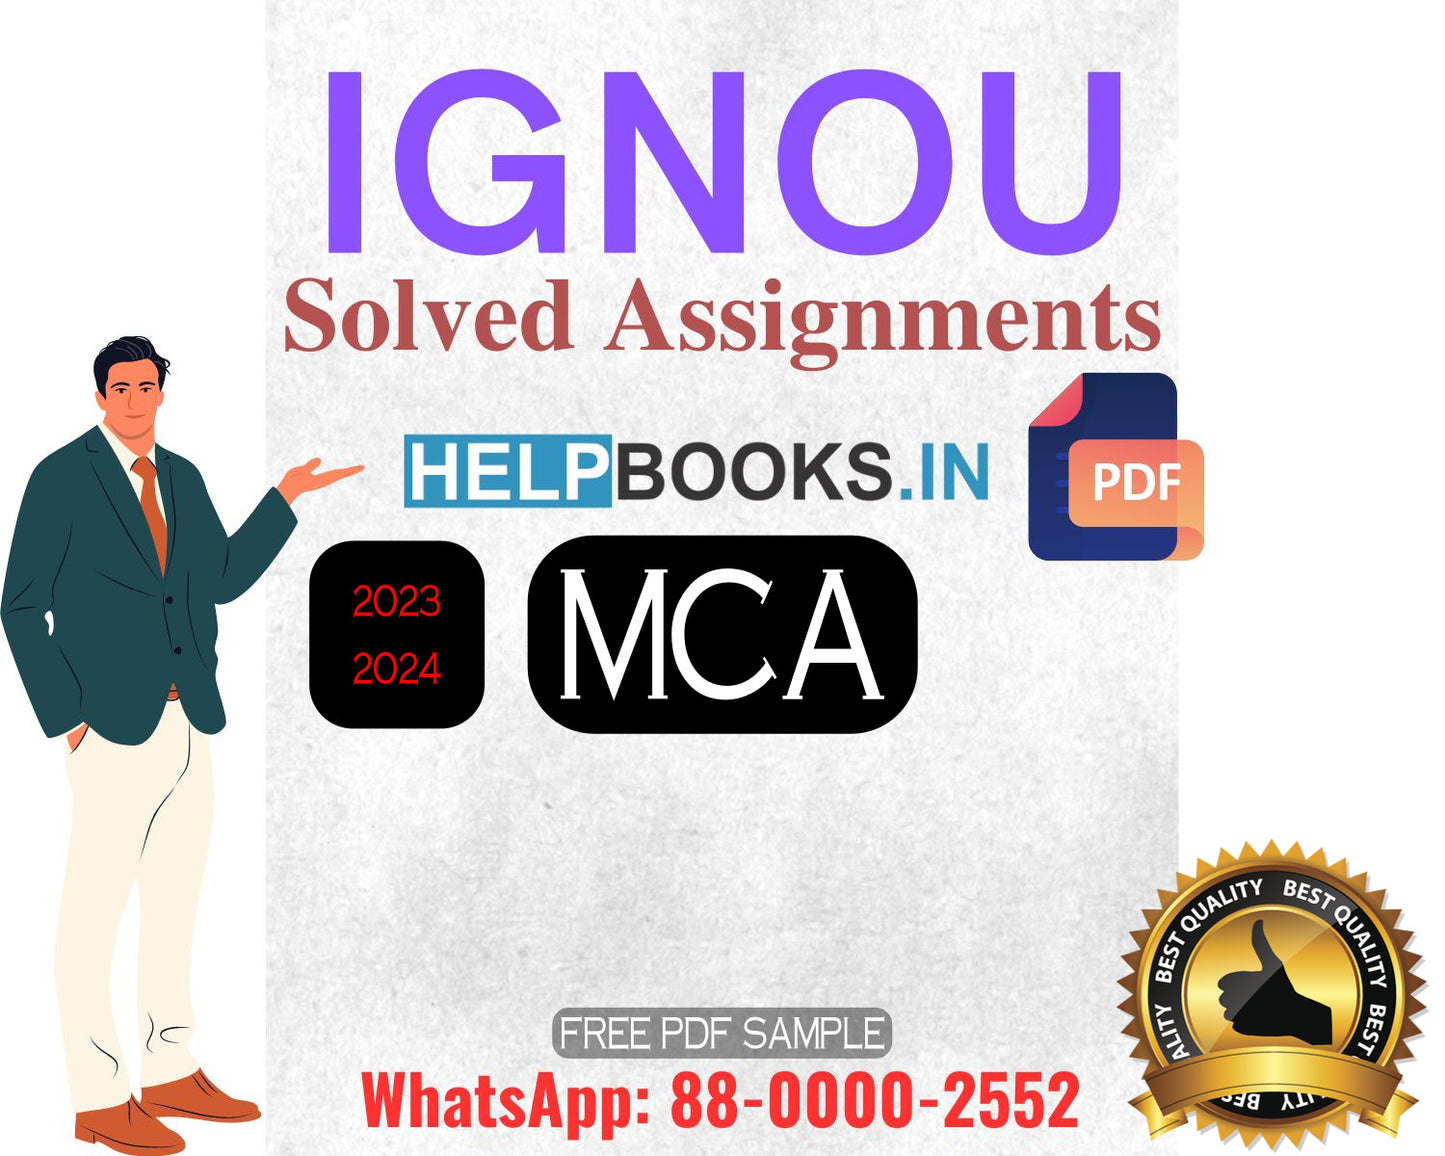 IGNOU Master's Degree Programme Latest IGNOU Solved Assignment 2023-24 & 2022-23 Sessions : Master of Computer Applications MCA_NEW Solved Assignments